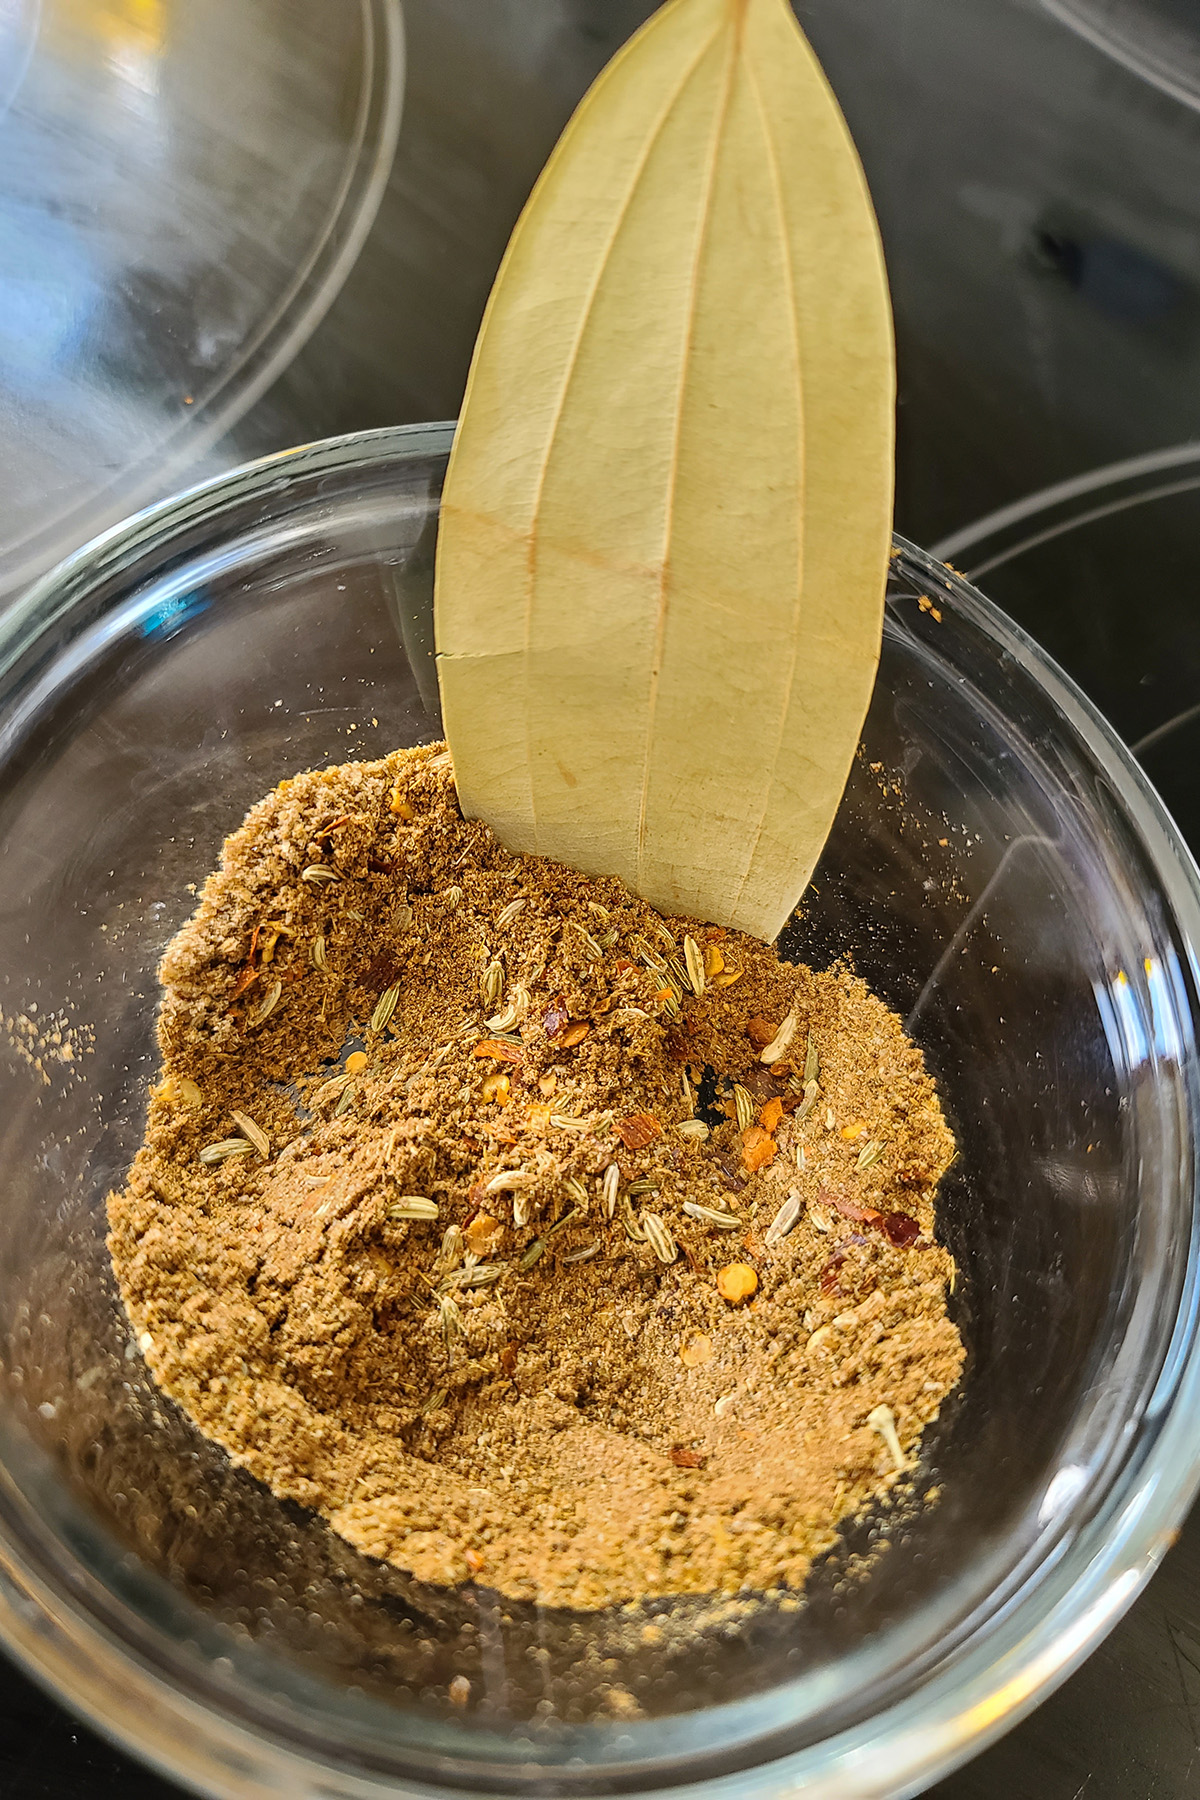 A small glass bowl of spices, with a bay leaf sticking out.